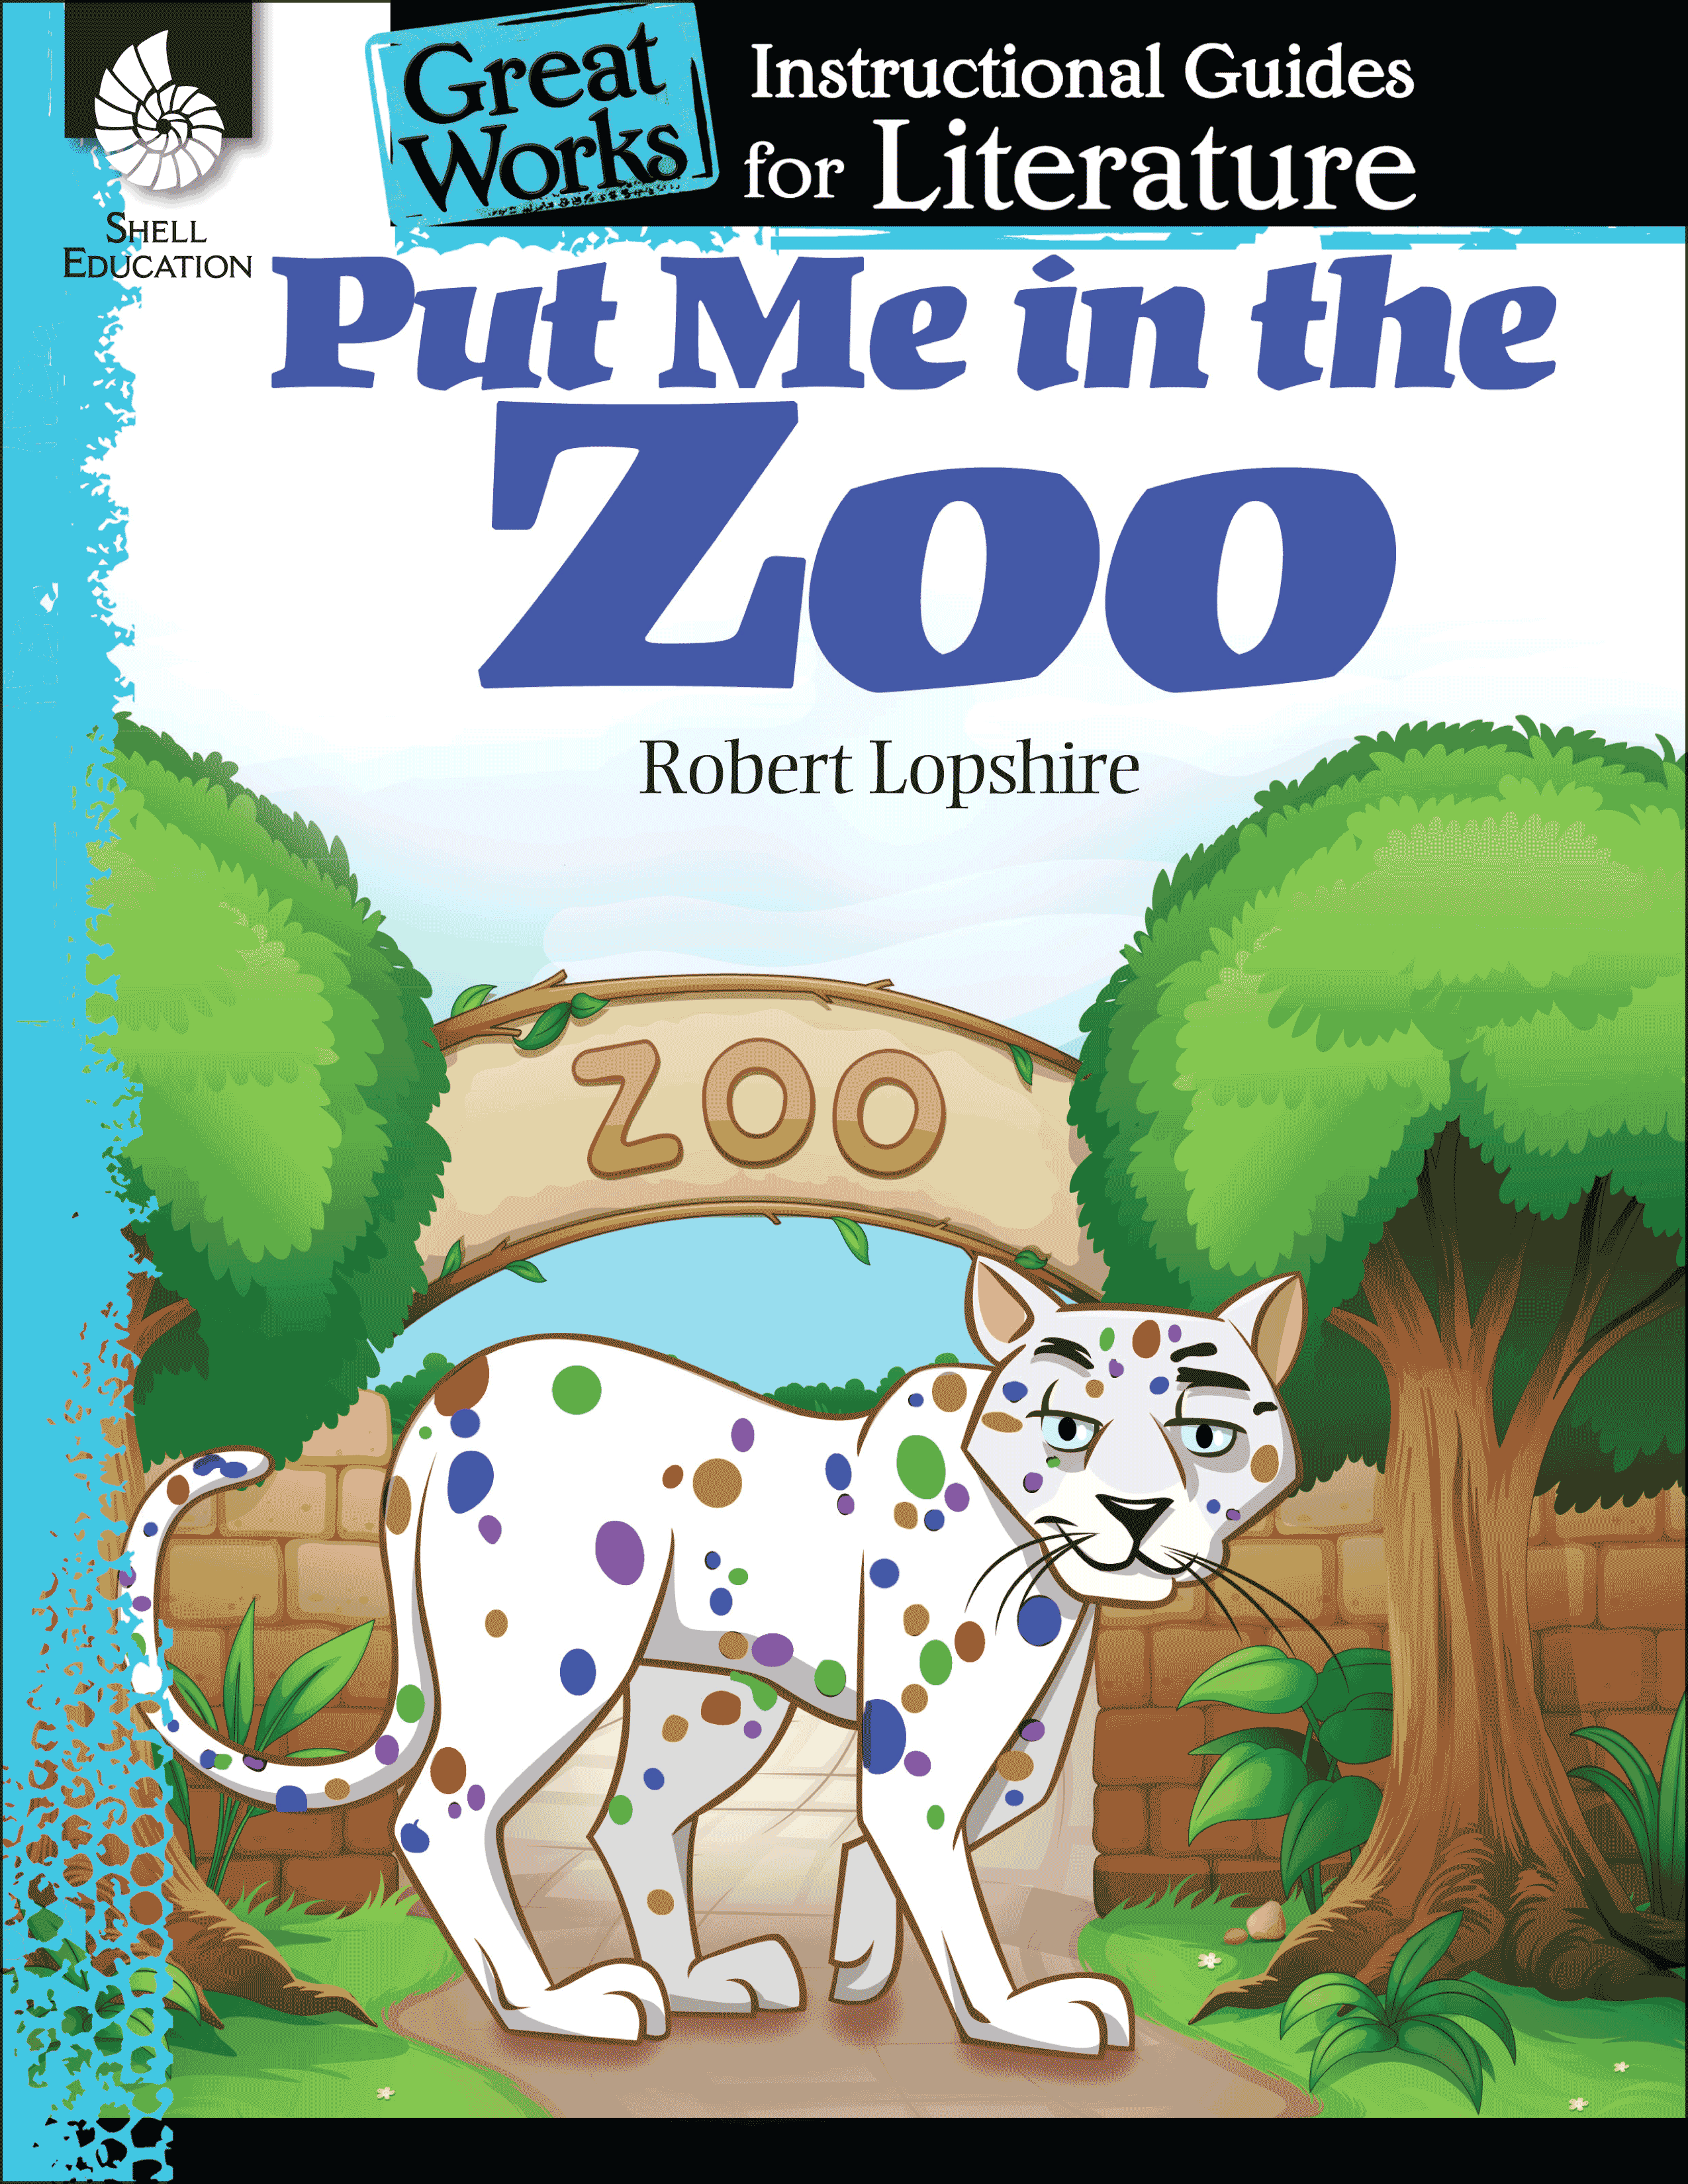 Put Me in the Zoo: An Instructional Guide for Literature | Teachers - Classroom Resources